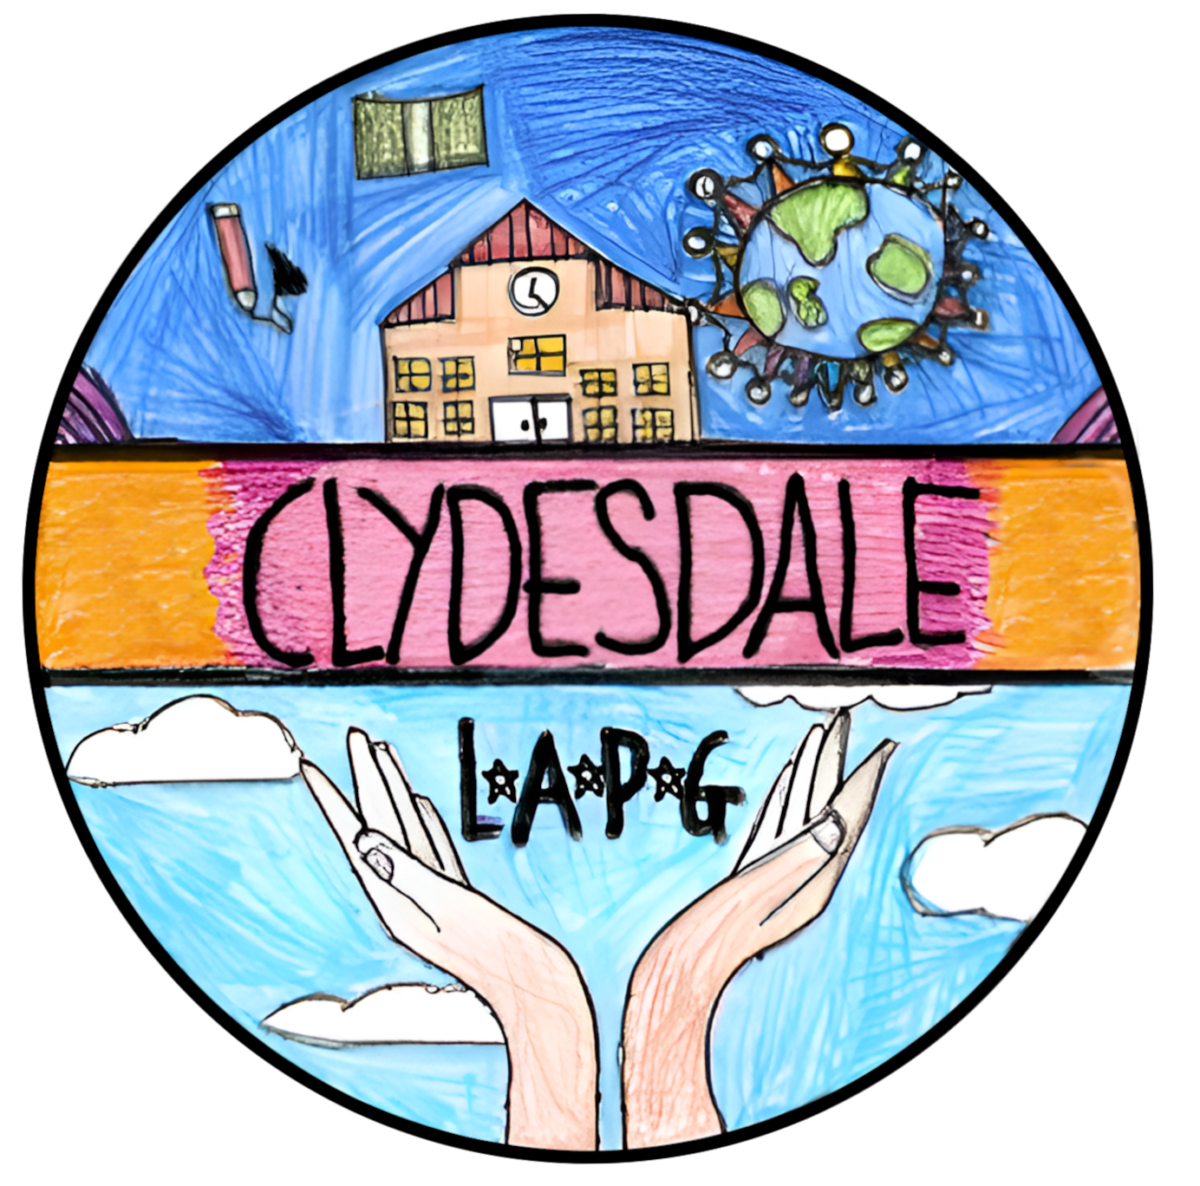 Clydesdale Summer Programme